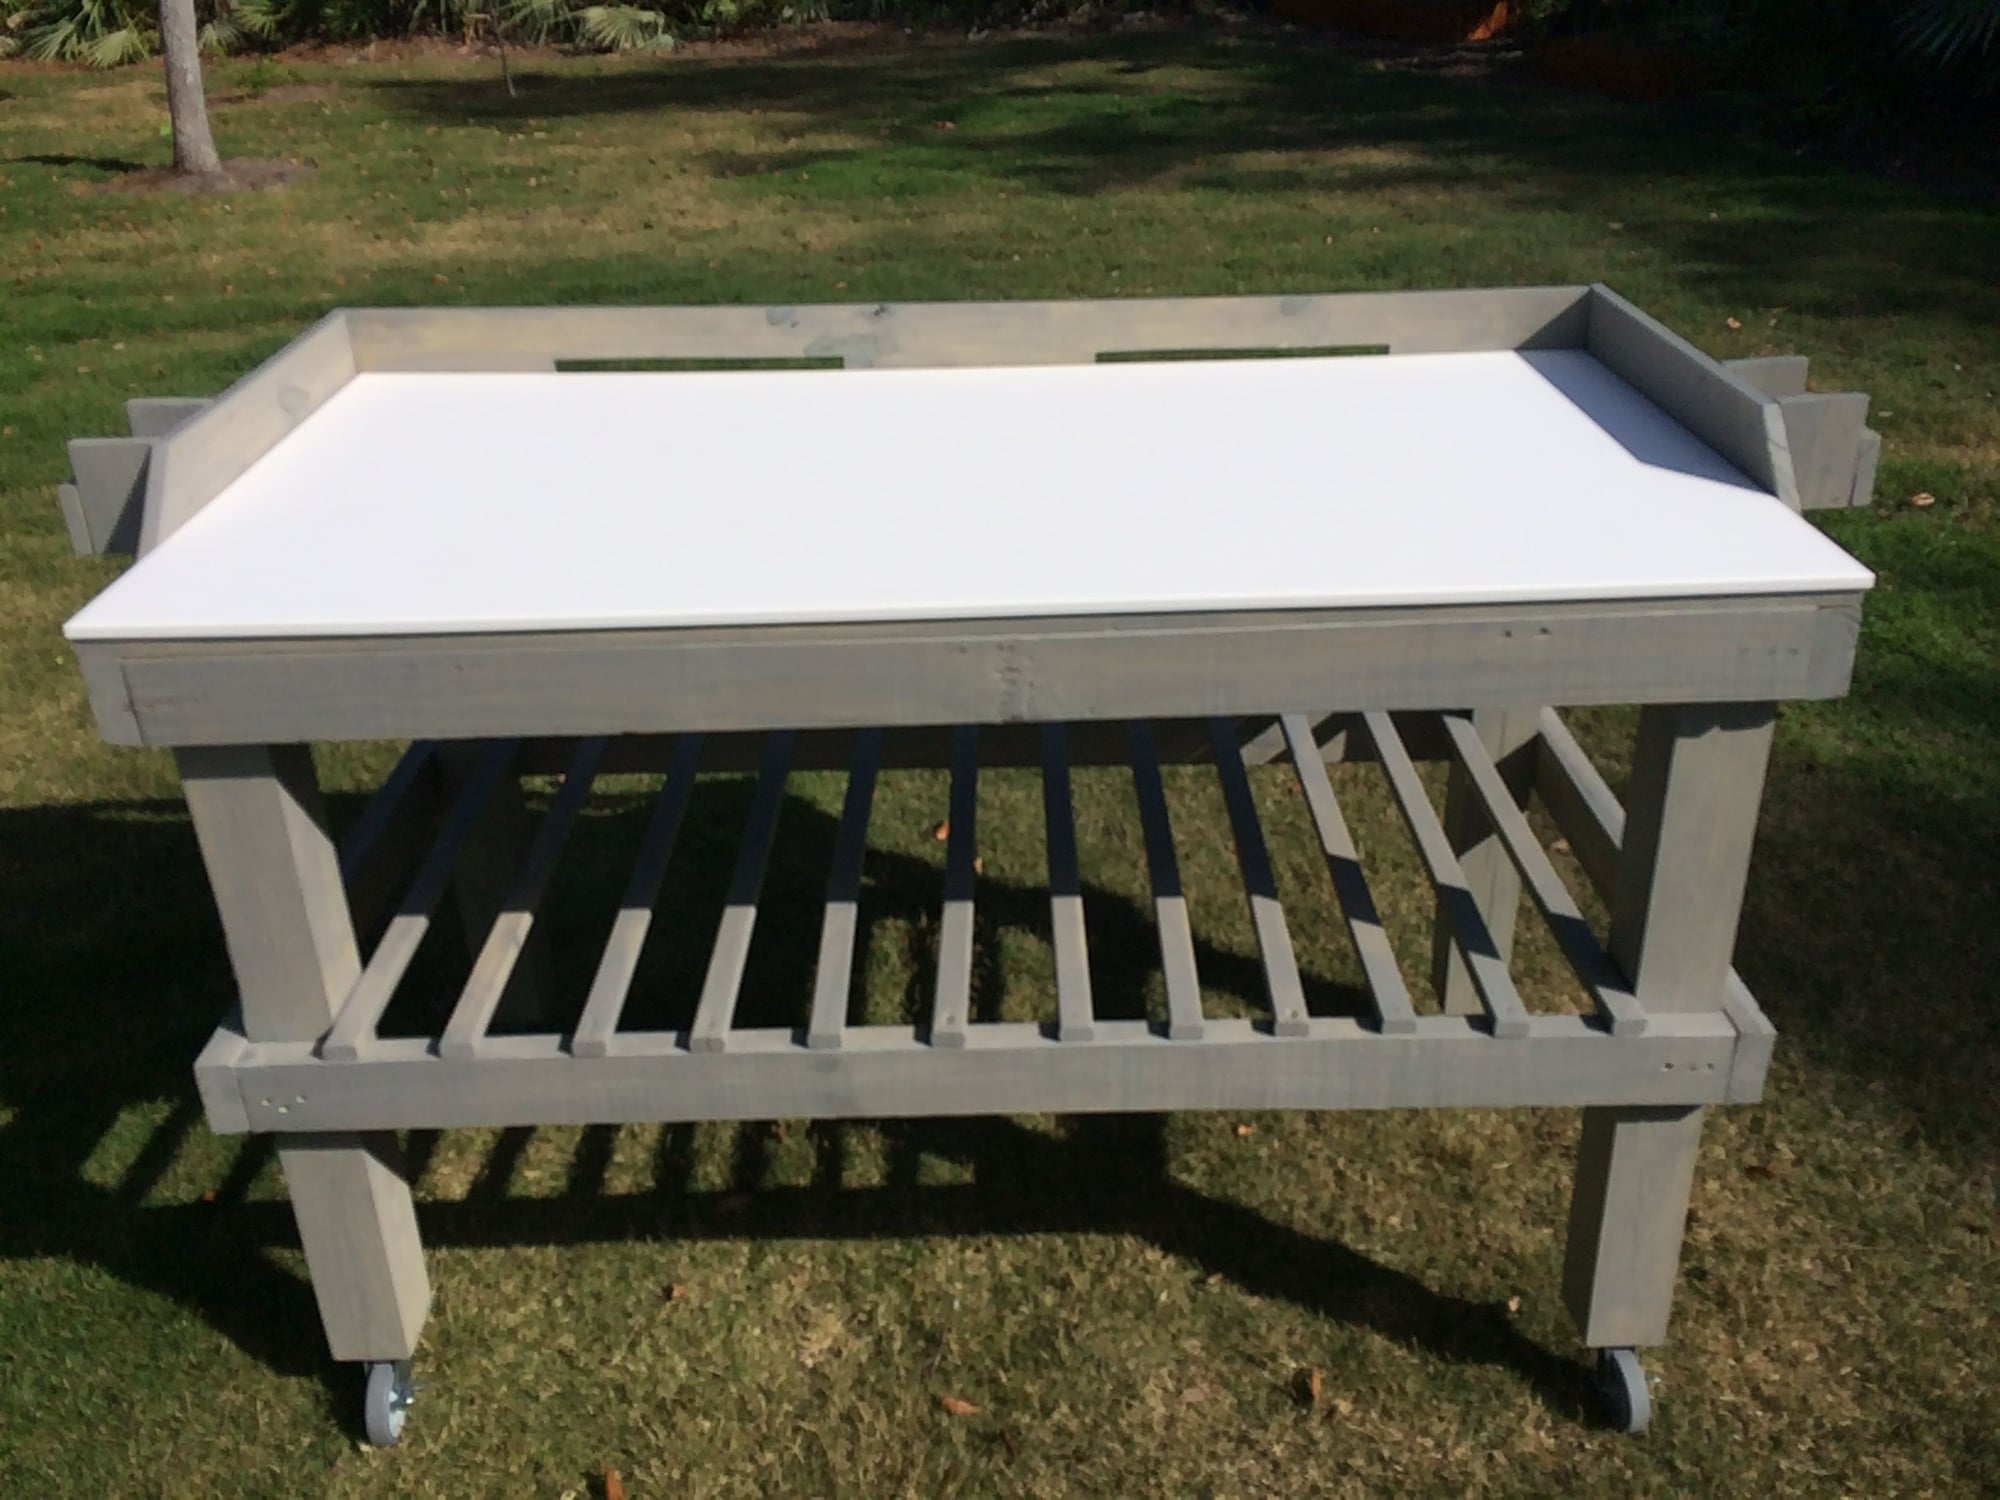 Homemade fish cleaning table - The Hull Truth - Boating and Fishing Forum